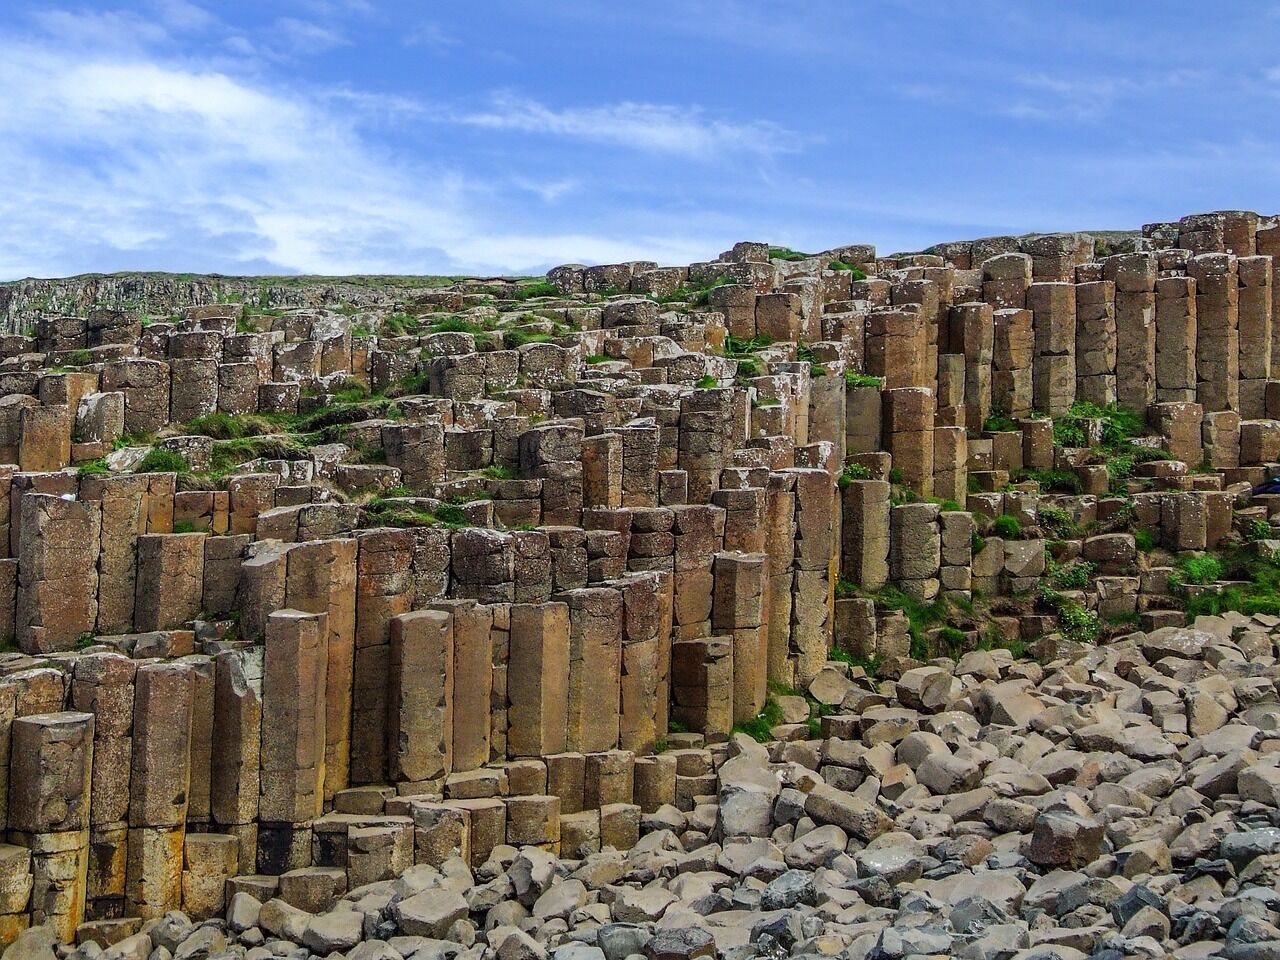 Cities of giants, salt flats, and stone forests: top 5 natural geological wonders of the world